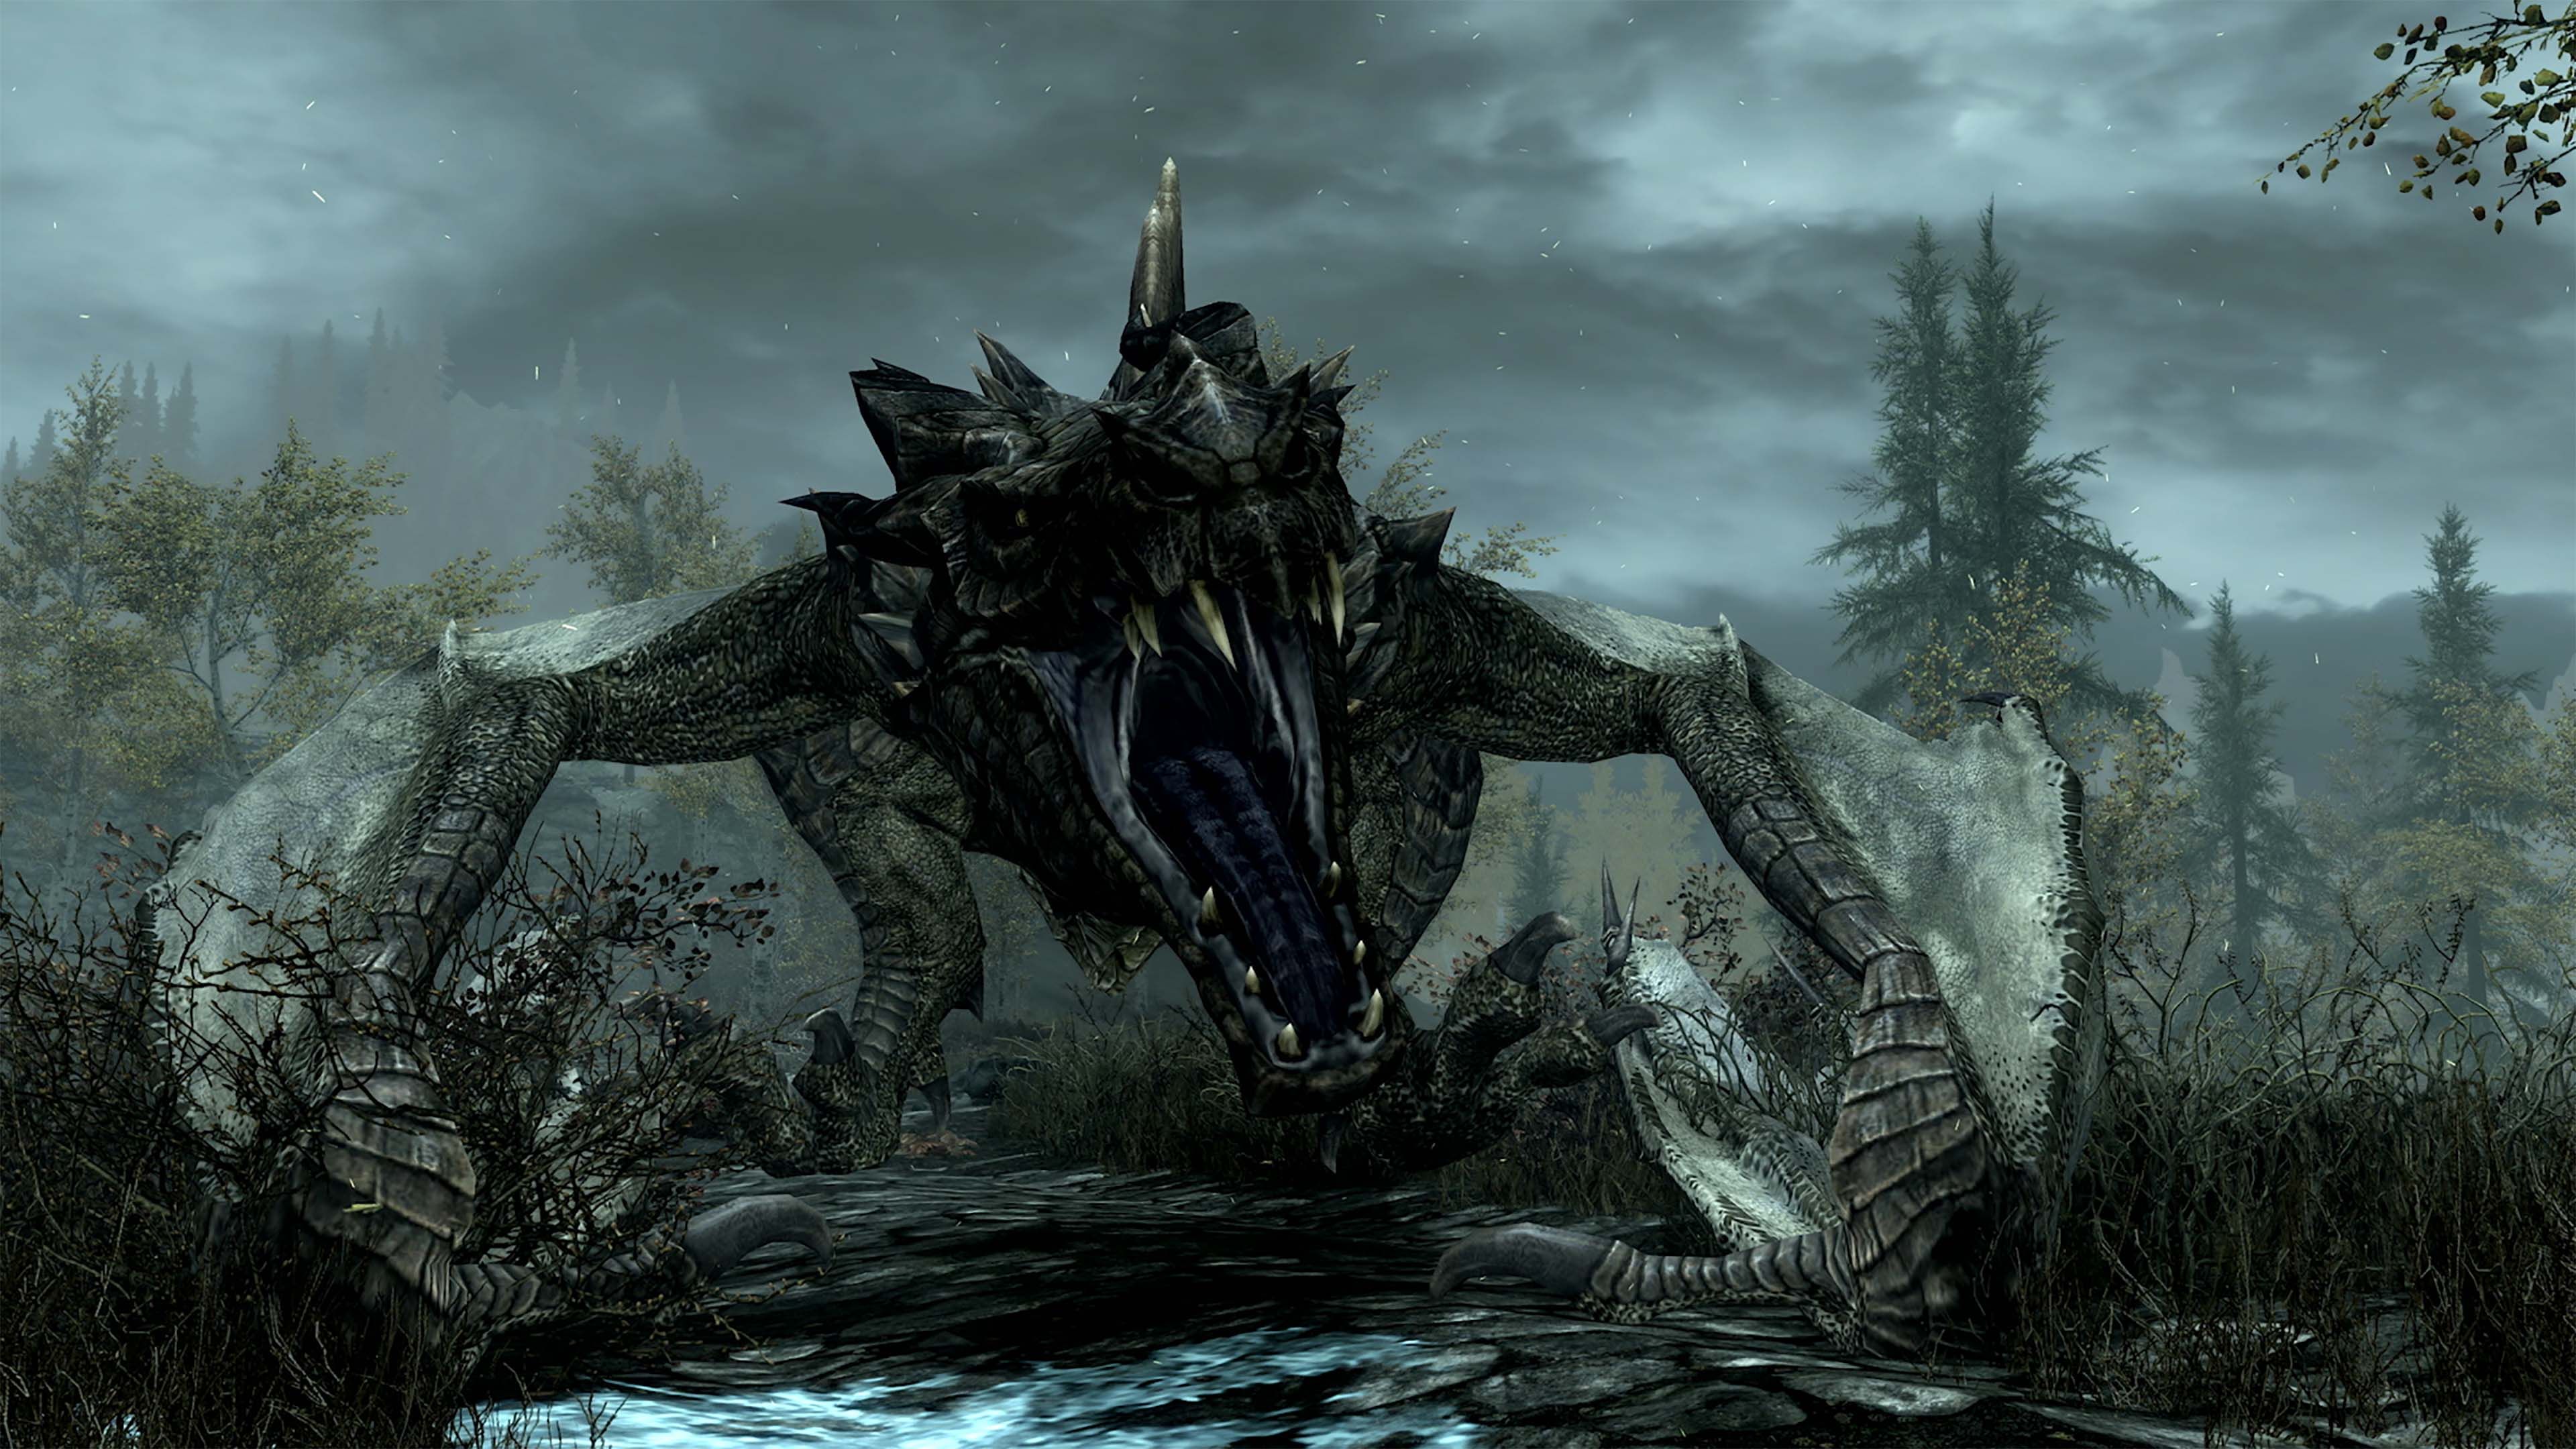 This Skyrim Mod Adds a Mordor-Inspired Nemesis System To The Game